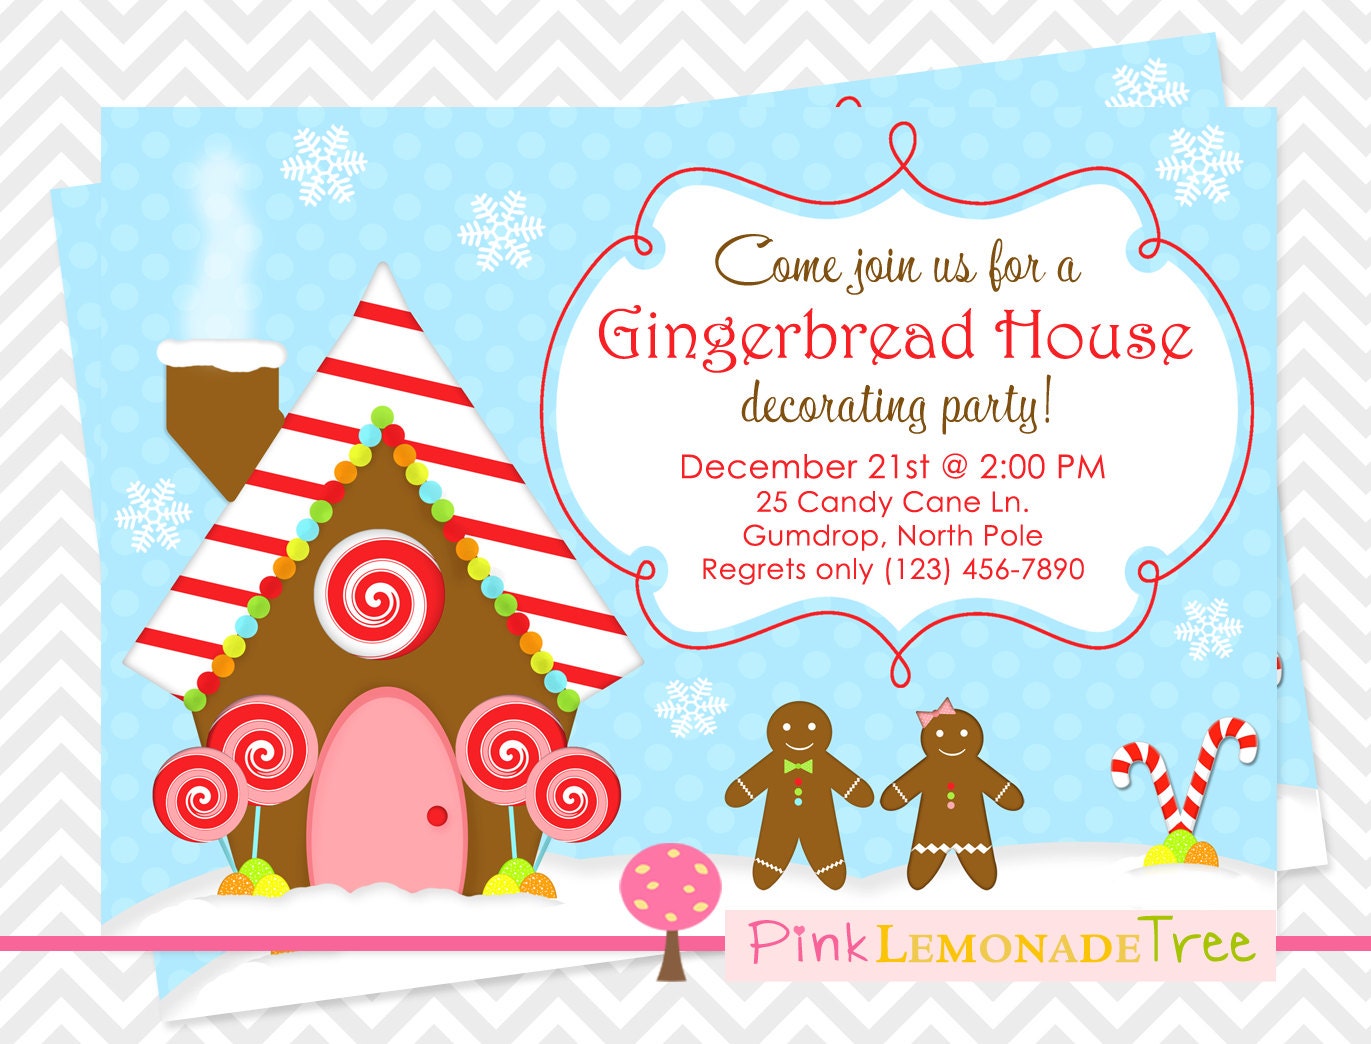 gingerbread-house-christmas-party-invitation-by-pinklemonadetree